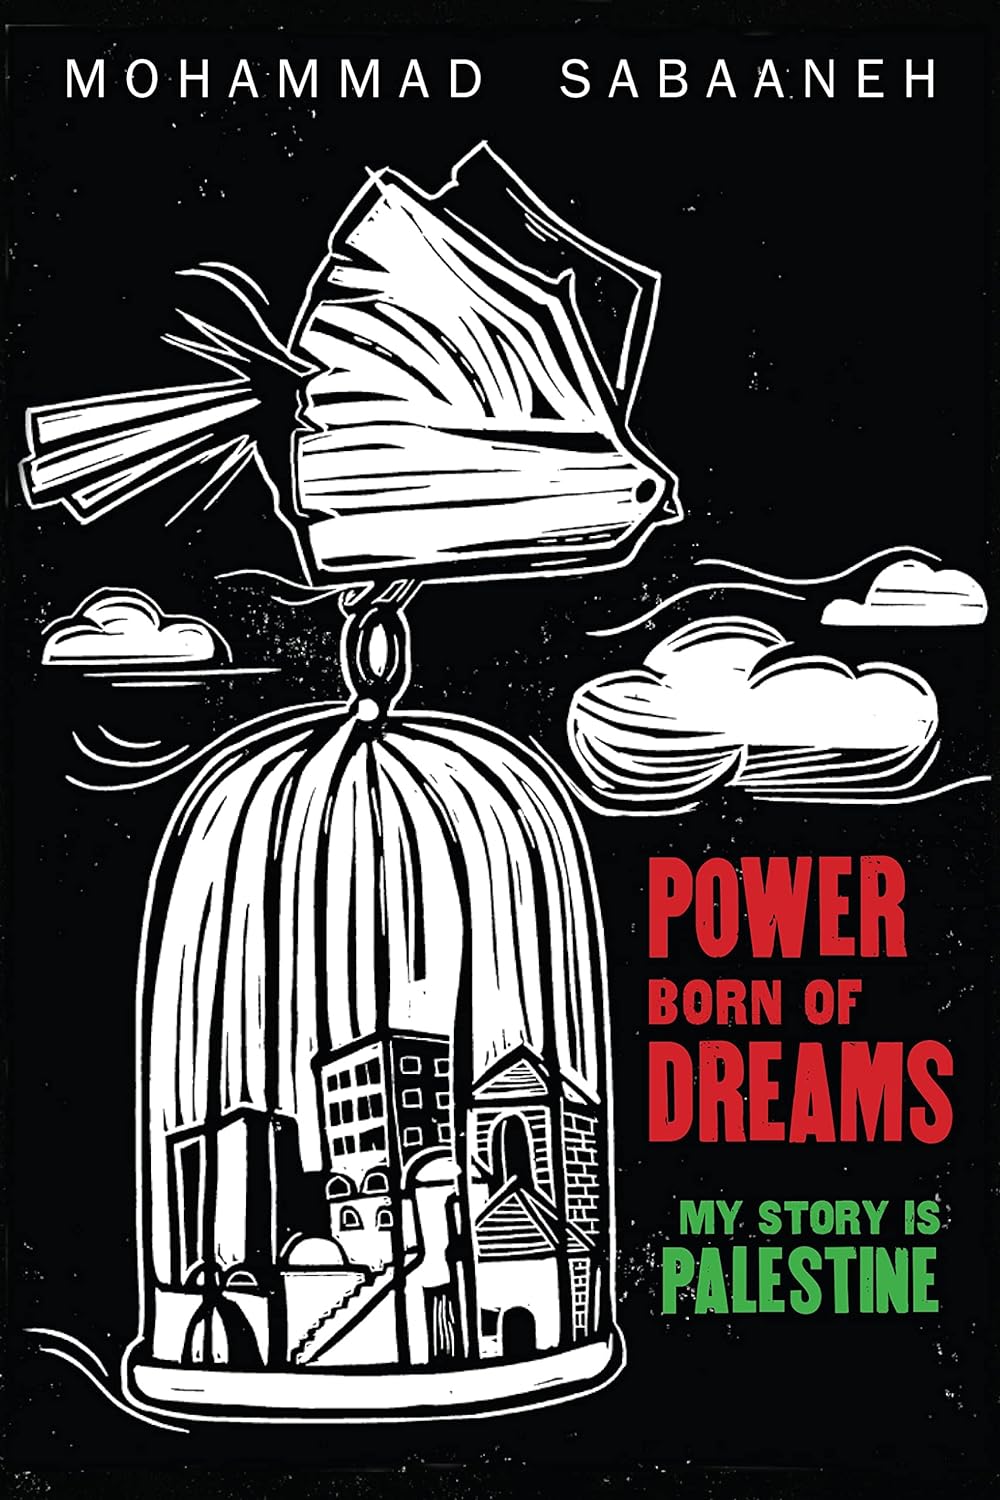 Power Born of Dreams: My Story Is Palestine, by Mohammad Sabaaneh